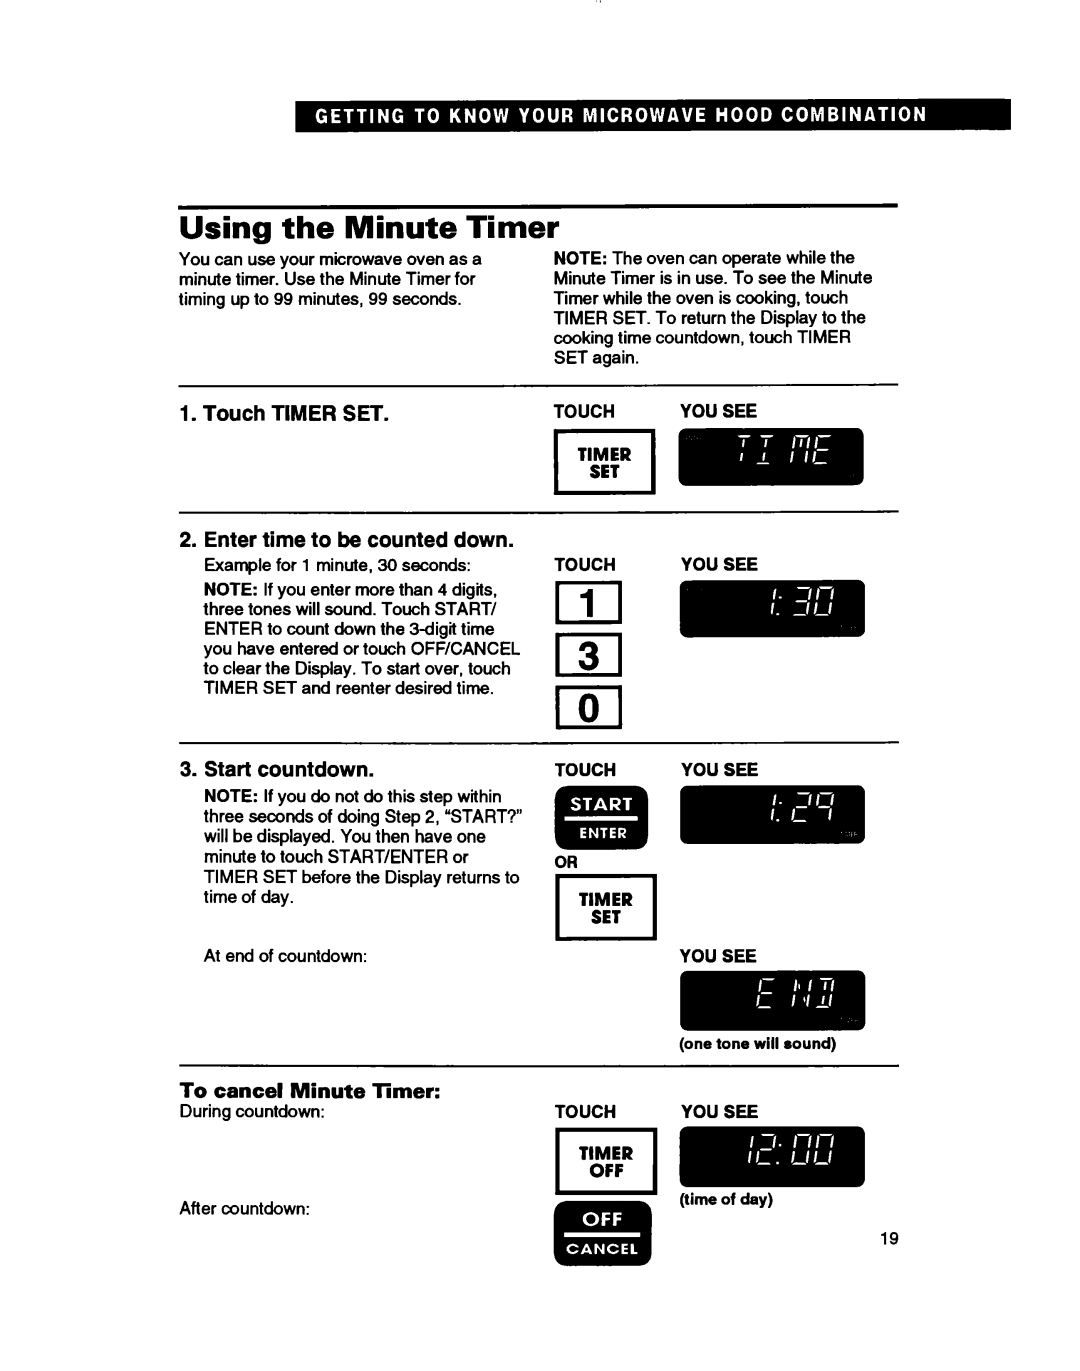 Whirlpool MH7110XB warranty Using the Minute Timer, Touch TIMER SET 2.Enter time to be counted down, Start countdown 